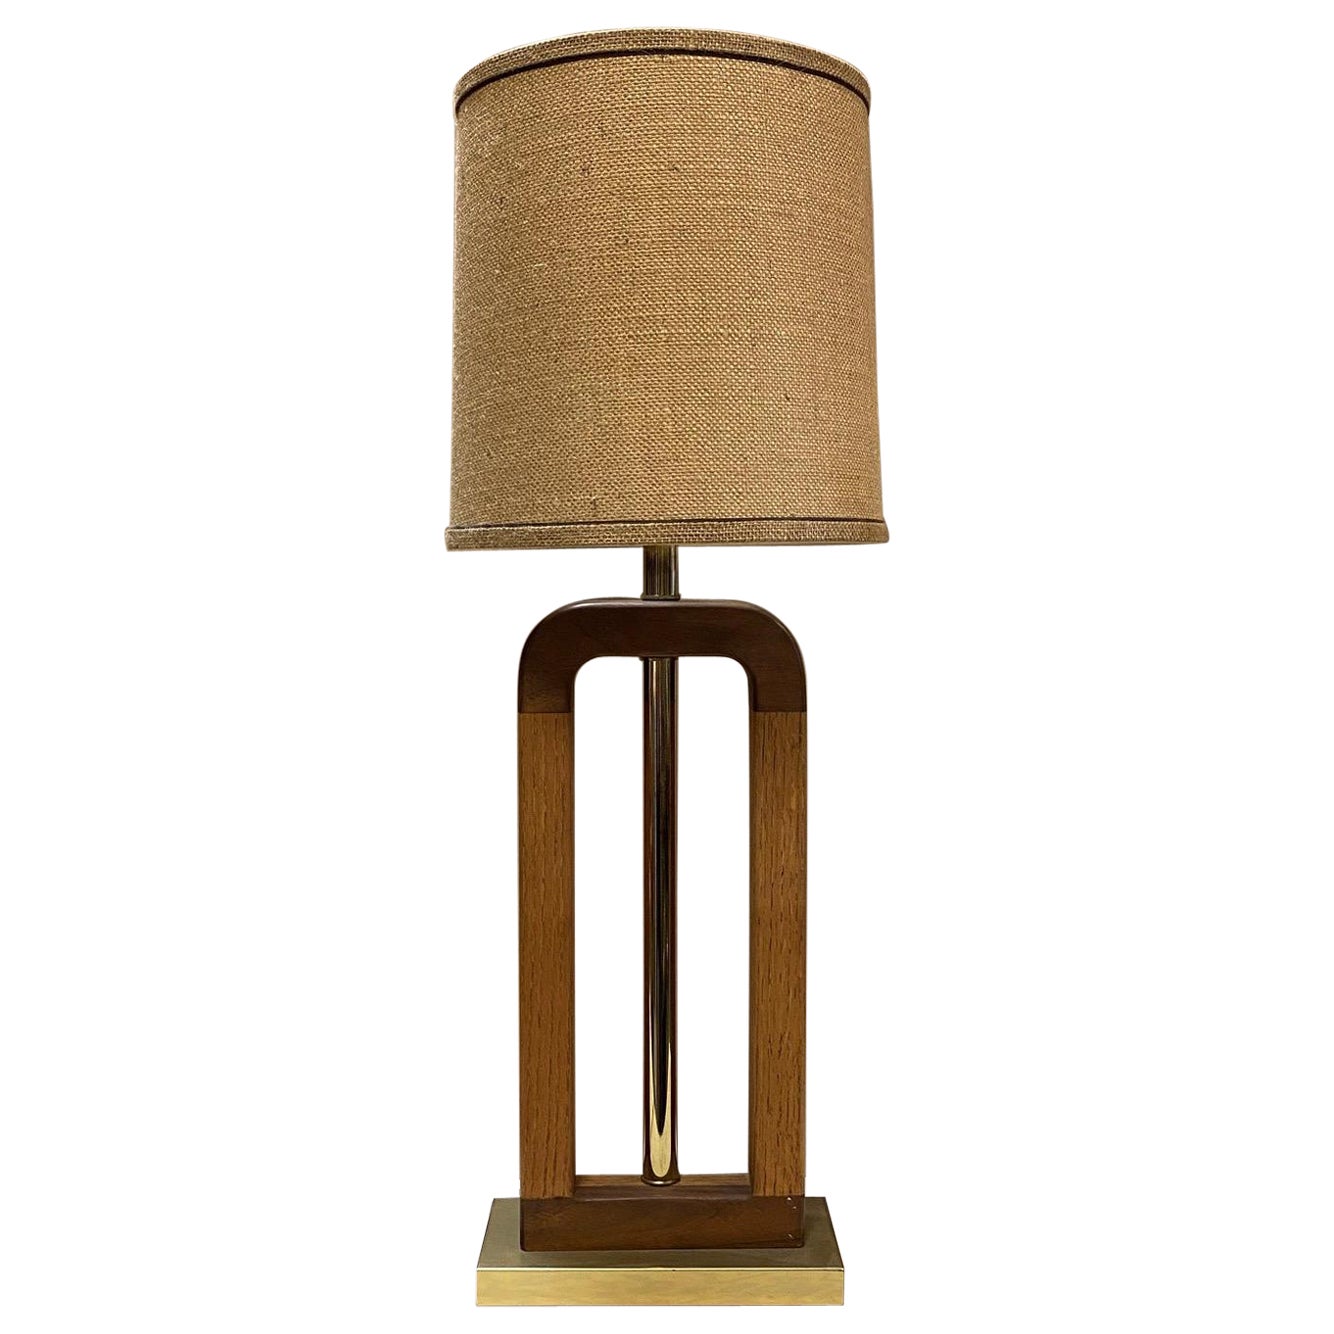 Mid-Century Modern Teak and Brass Table Lamp with Burlap Lamp Shade